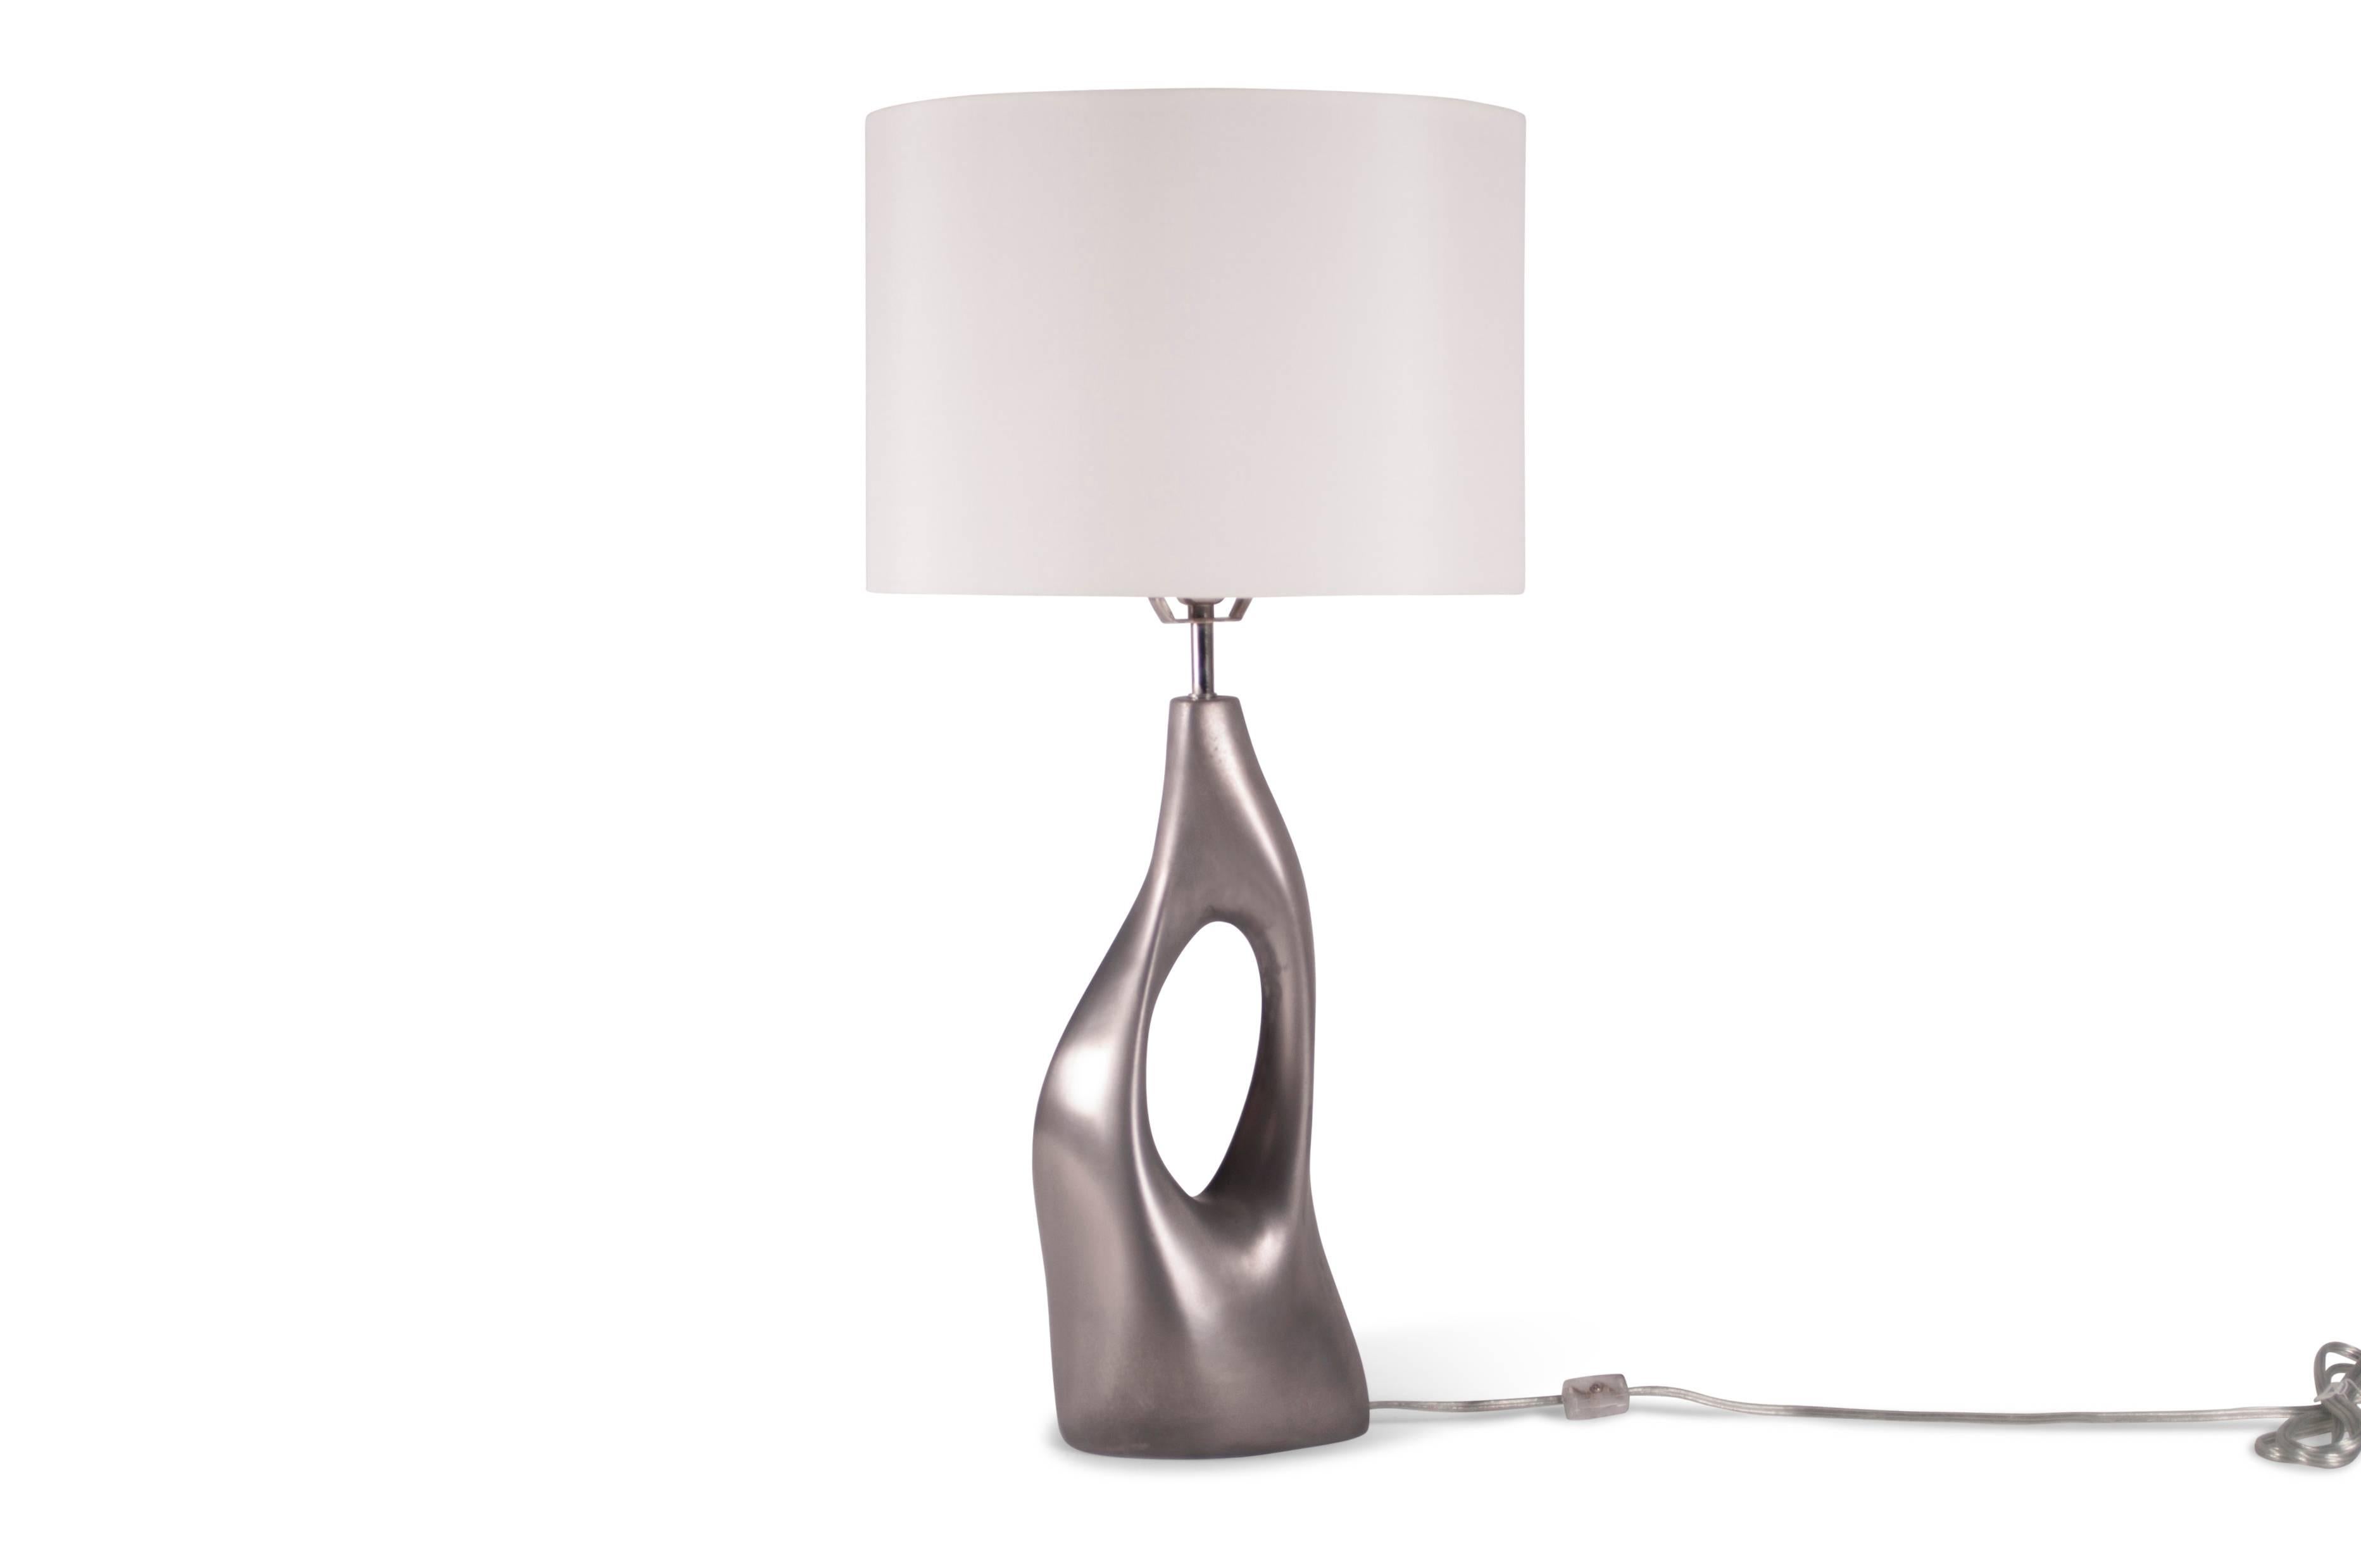 sculptural table lamp made from MDF with Cold Metal finish. Color: White Gold 
Dimension base: 16